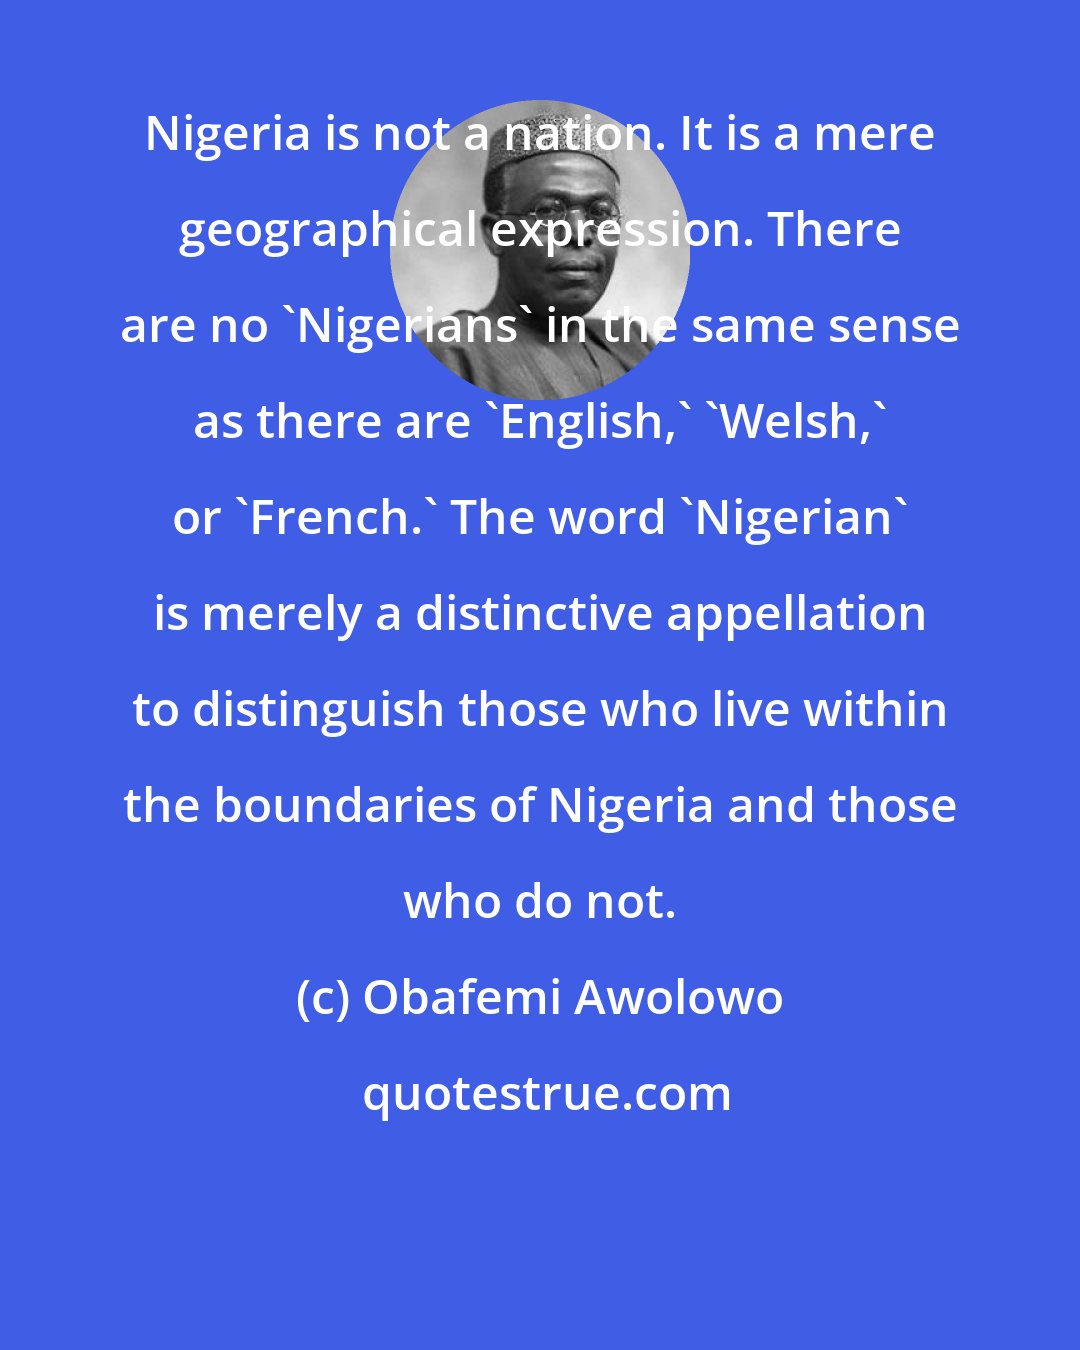 Obafemi Awolowo: Nigeria is not a nation. It is a mere geographical expression. There are no 'Nigerians' in the same sense as there are 'English,' 'Welsh,' or 'French.' The word 'Nigerian' is merely a distinctive appellation to distinguish those who live within the boundaries of Nigeria and those who do not.